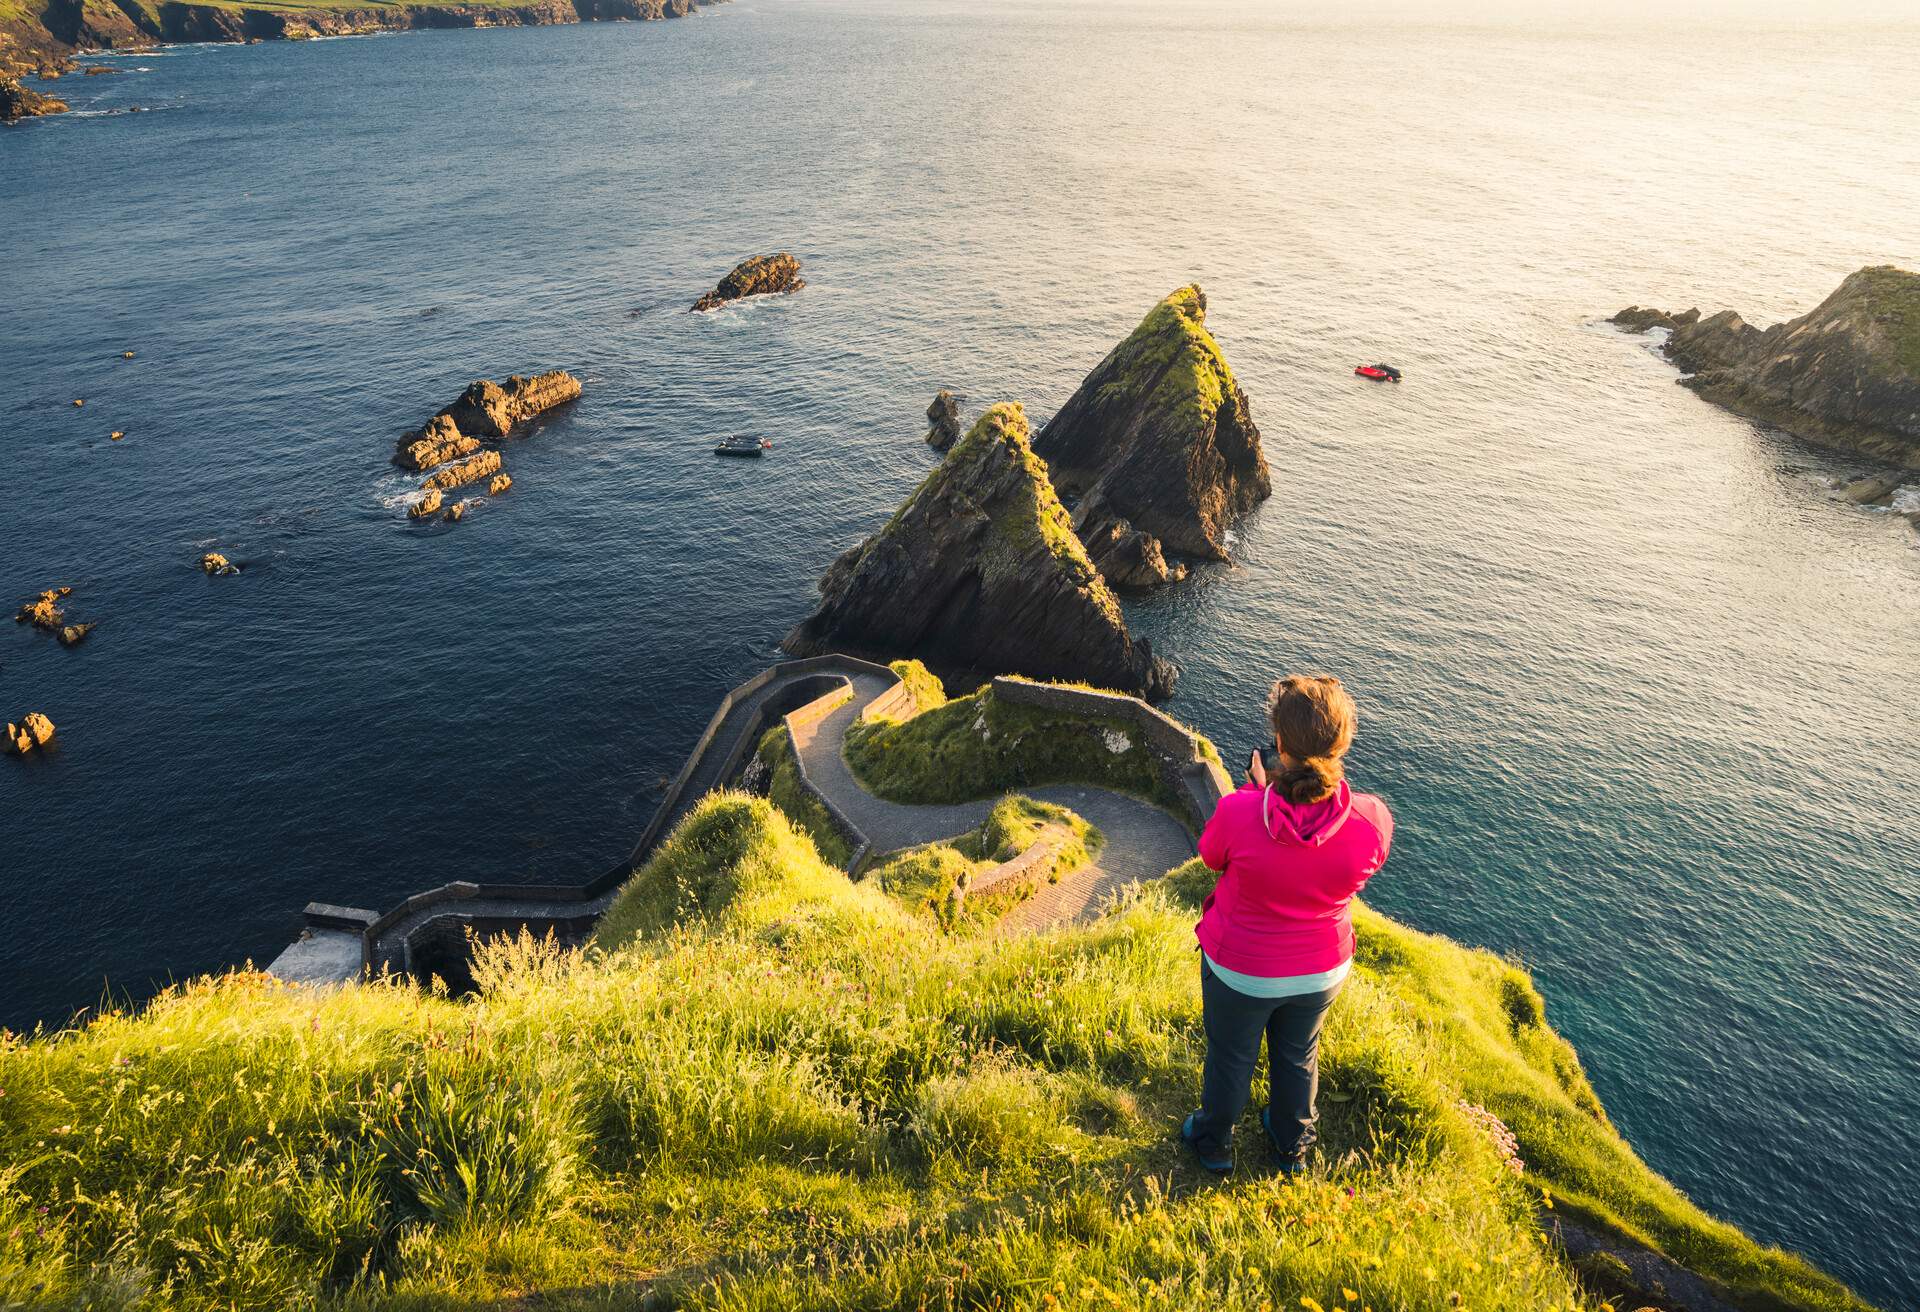 Republic of Ireland, Munster province, County Kerry: high angle view of a woman taking pictures at Dunquin Pier, along the Ring of Kerry on Dingle Peninsula.